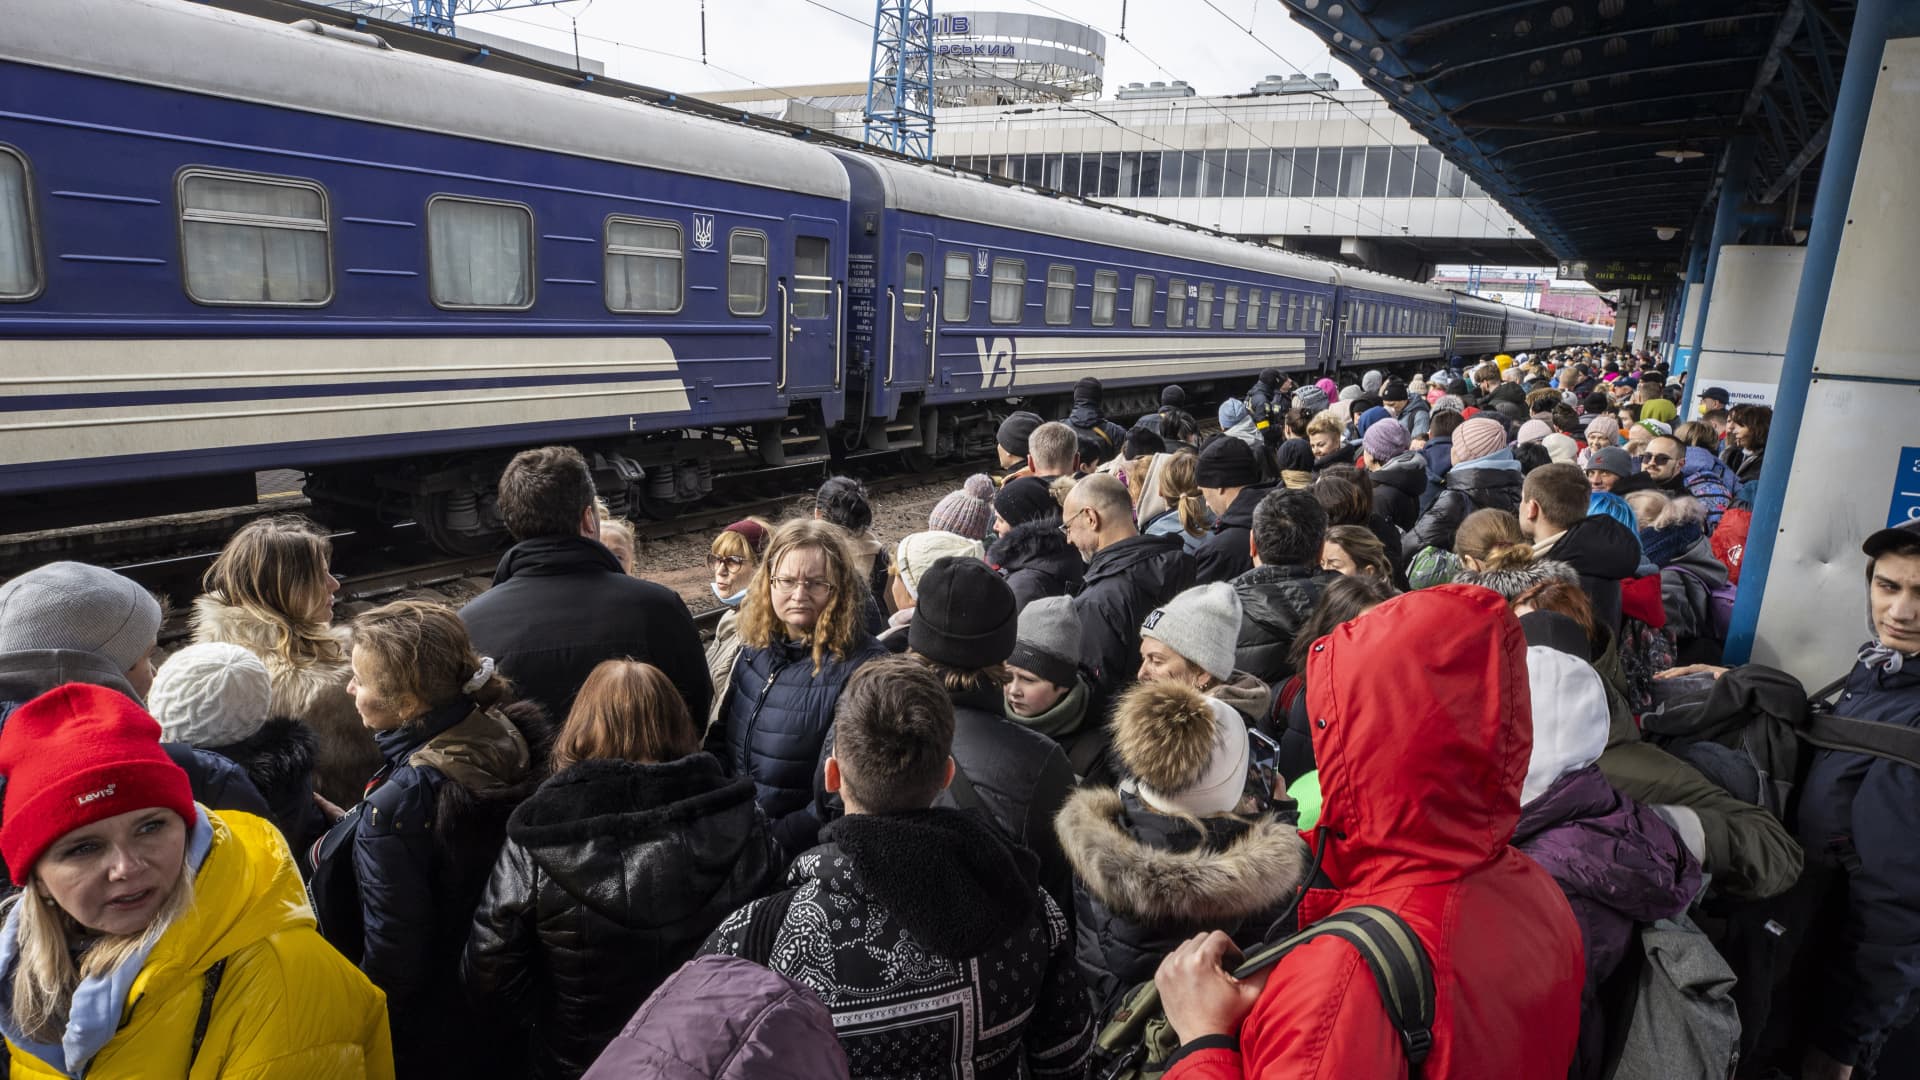 People who wanted to leave Ukraine's capital Kyiv, due to the Russian attacks on Ukraine, are seen at the Kyiv Train Station trying to find a train, in Kyiv, Ukraine on March 4, 2022.